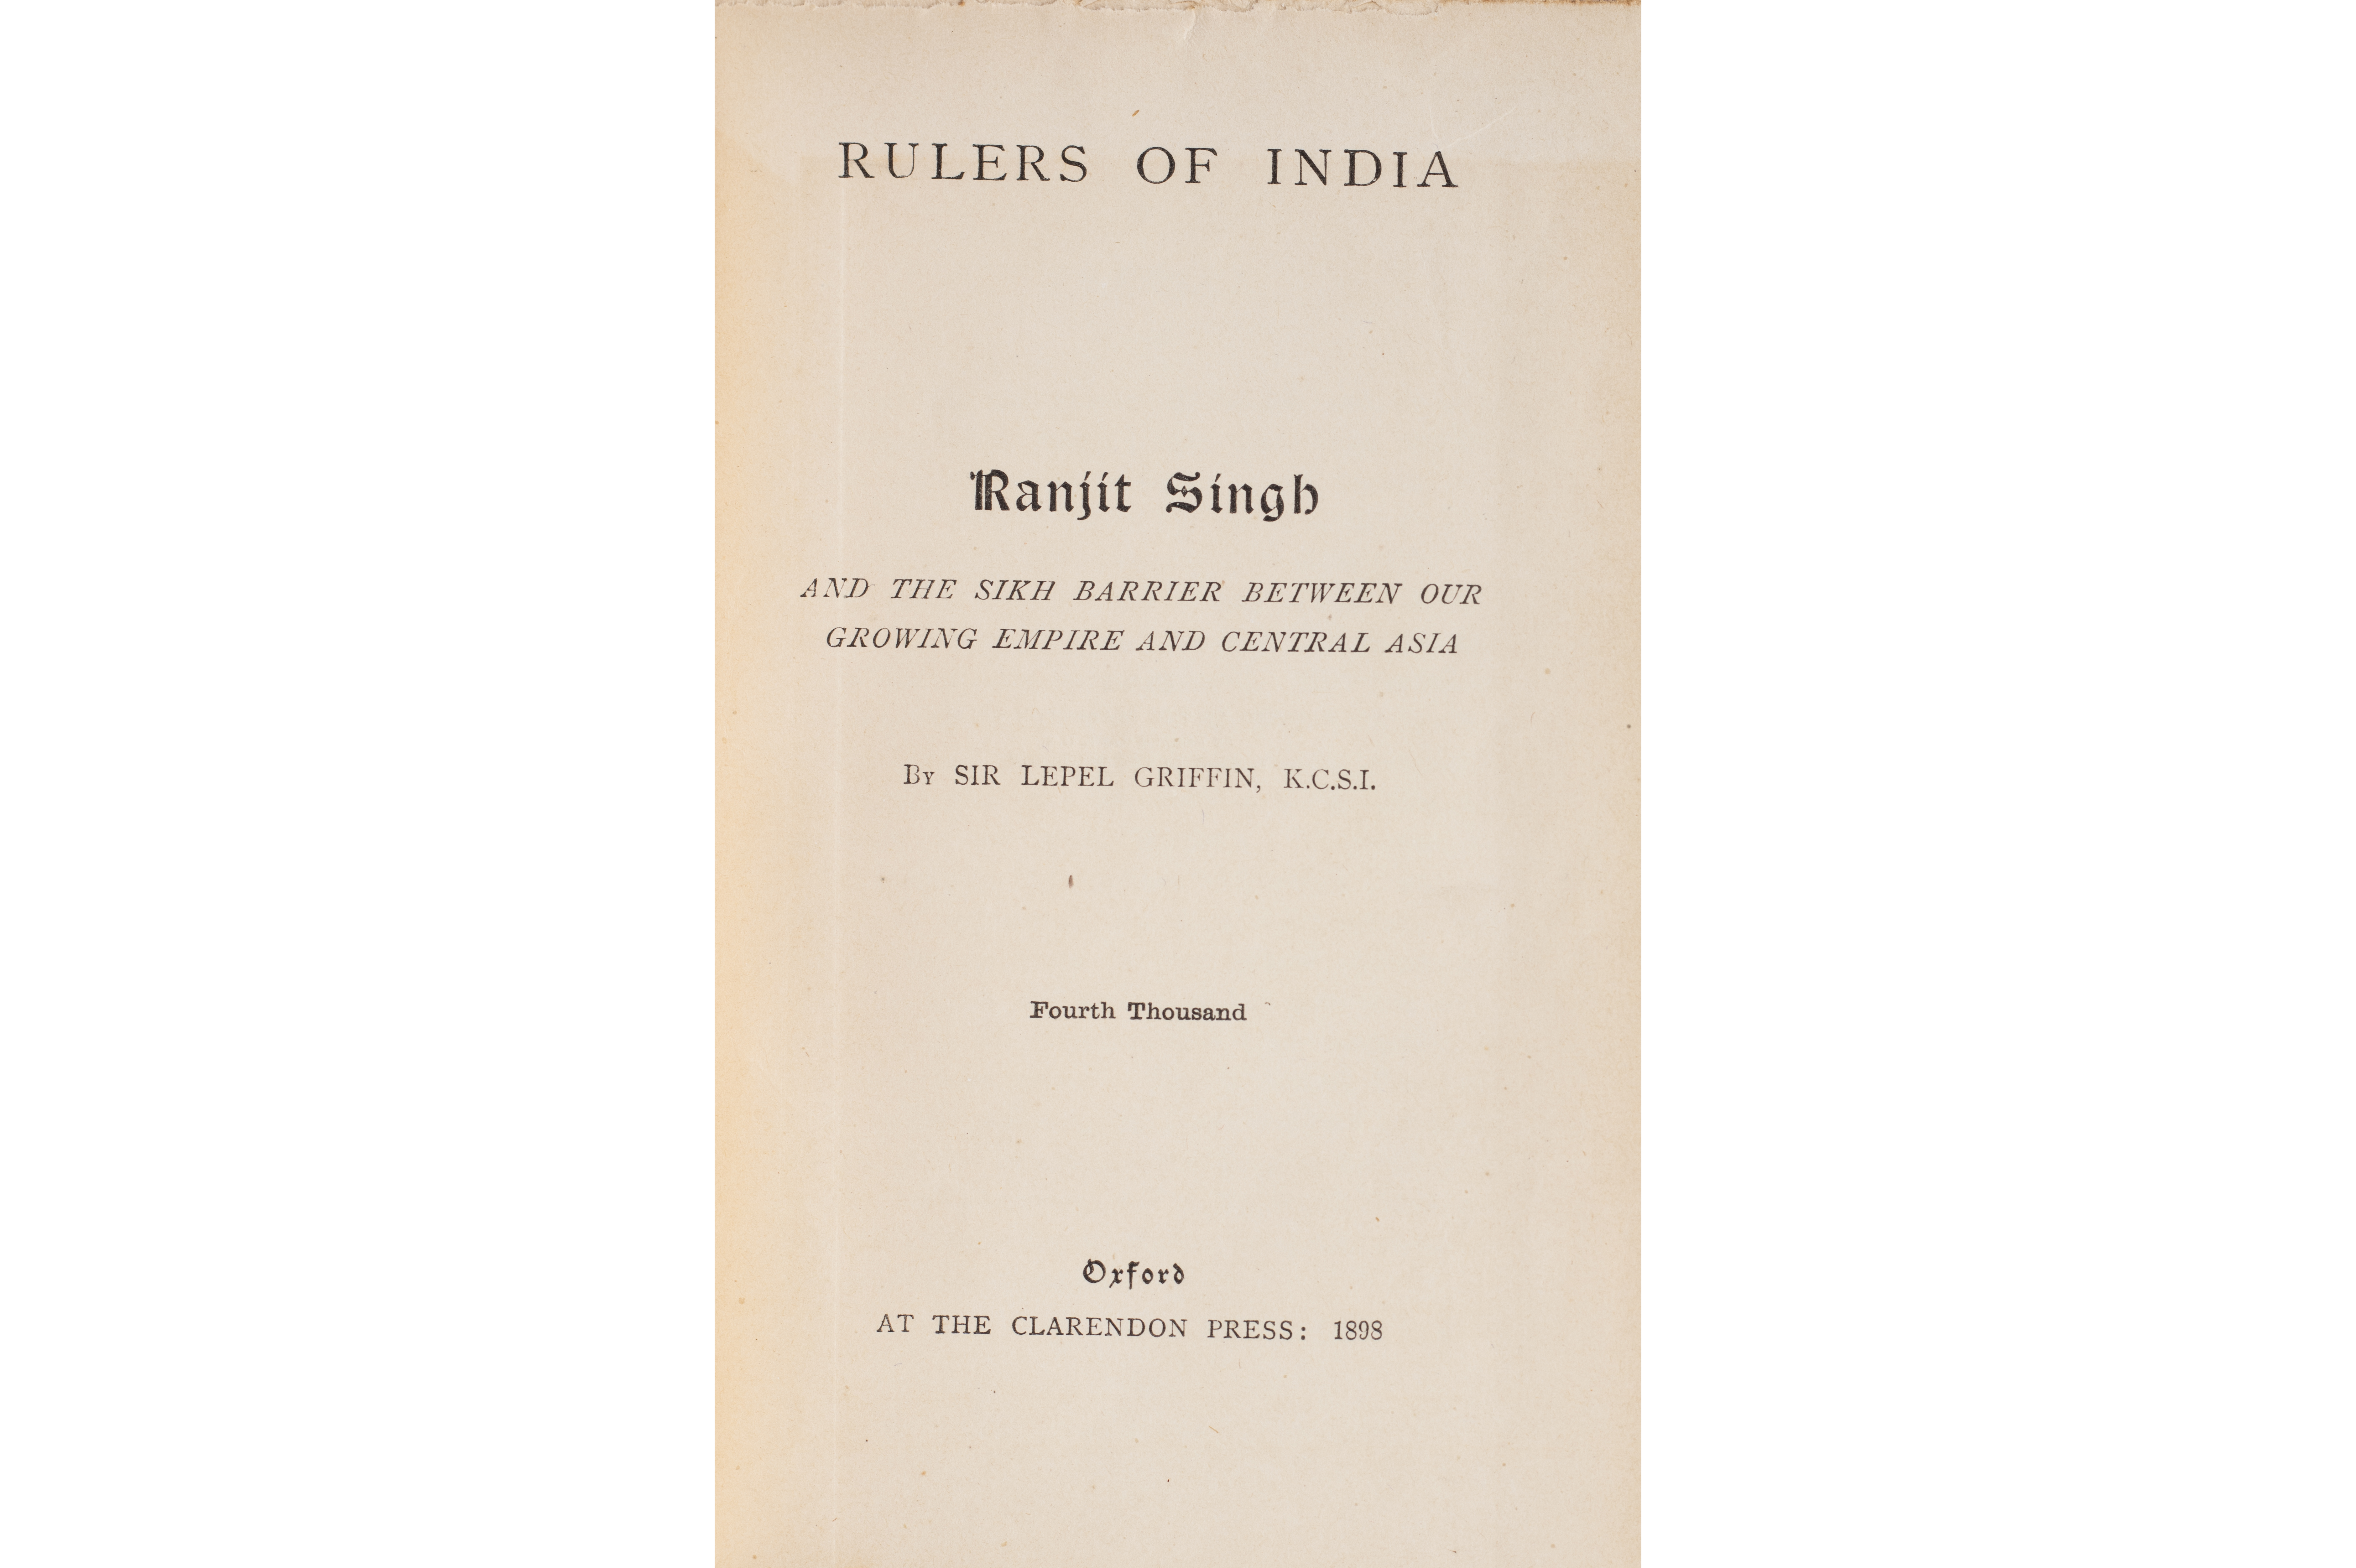 VARIOUS AUTHORS - 'RULERS OF INDIA' - Image 16 of 19